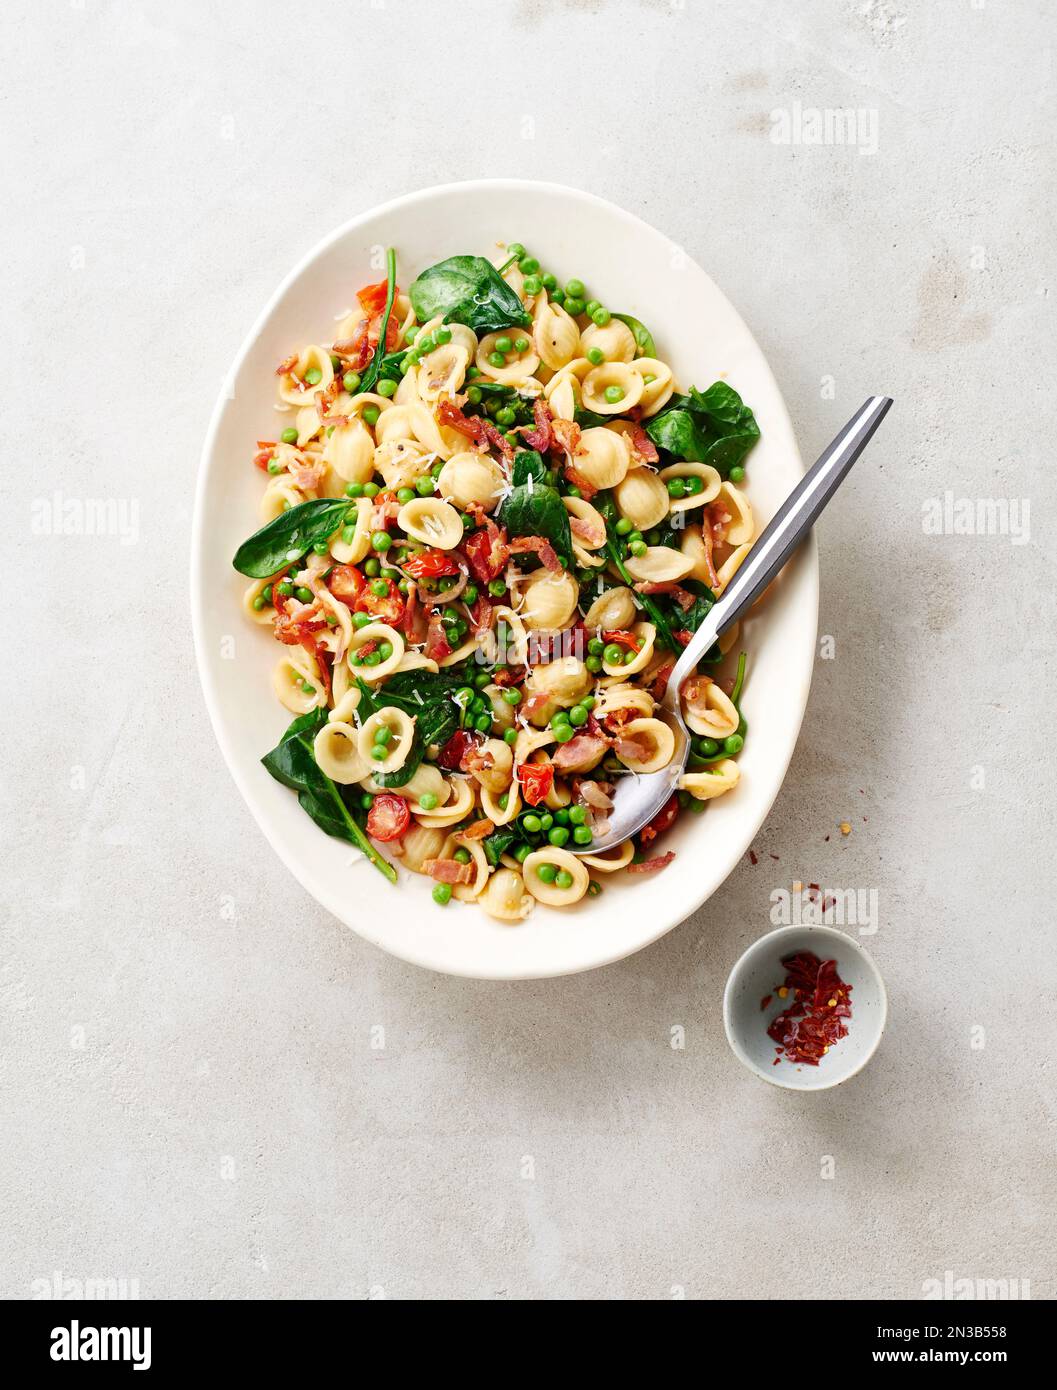 Platter of orecchiette pasta with peas, bacon, spinach and tomatoes and chili flakes in a small bowl on a beige background Stock Photo